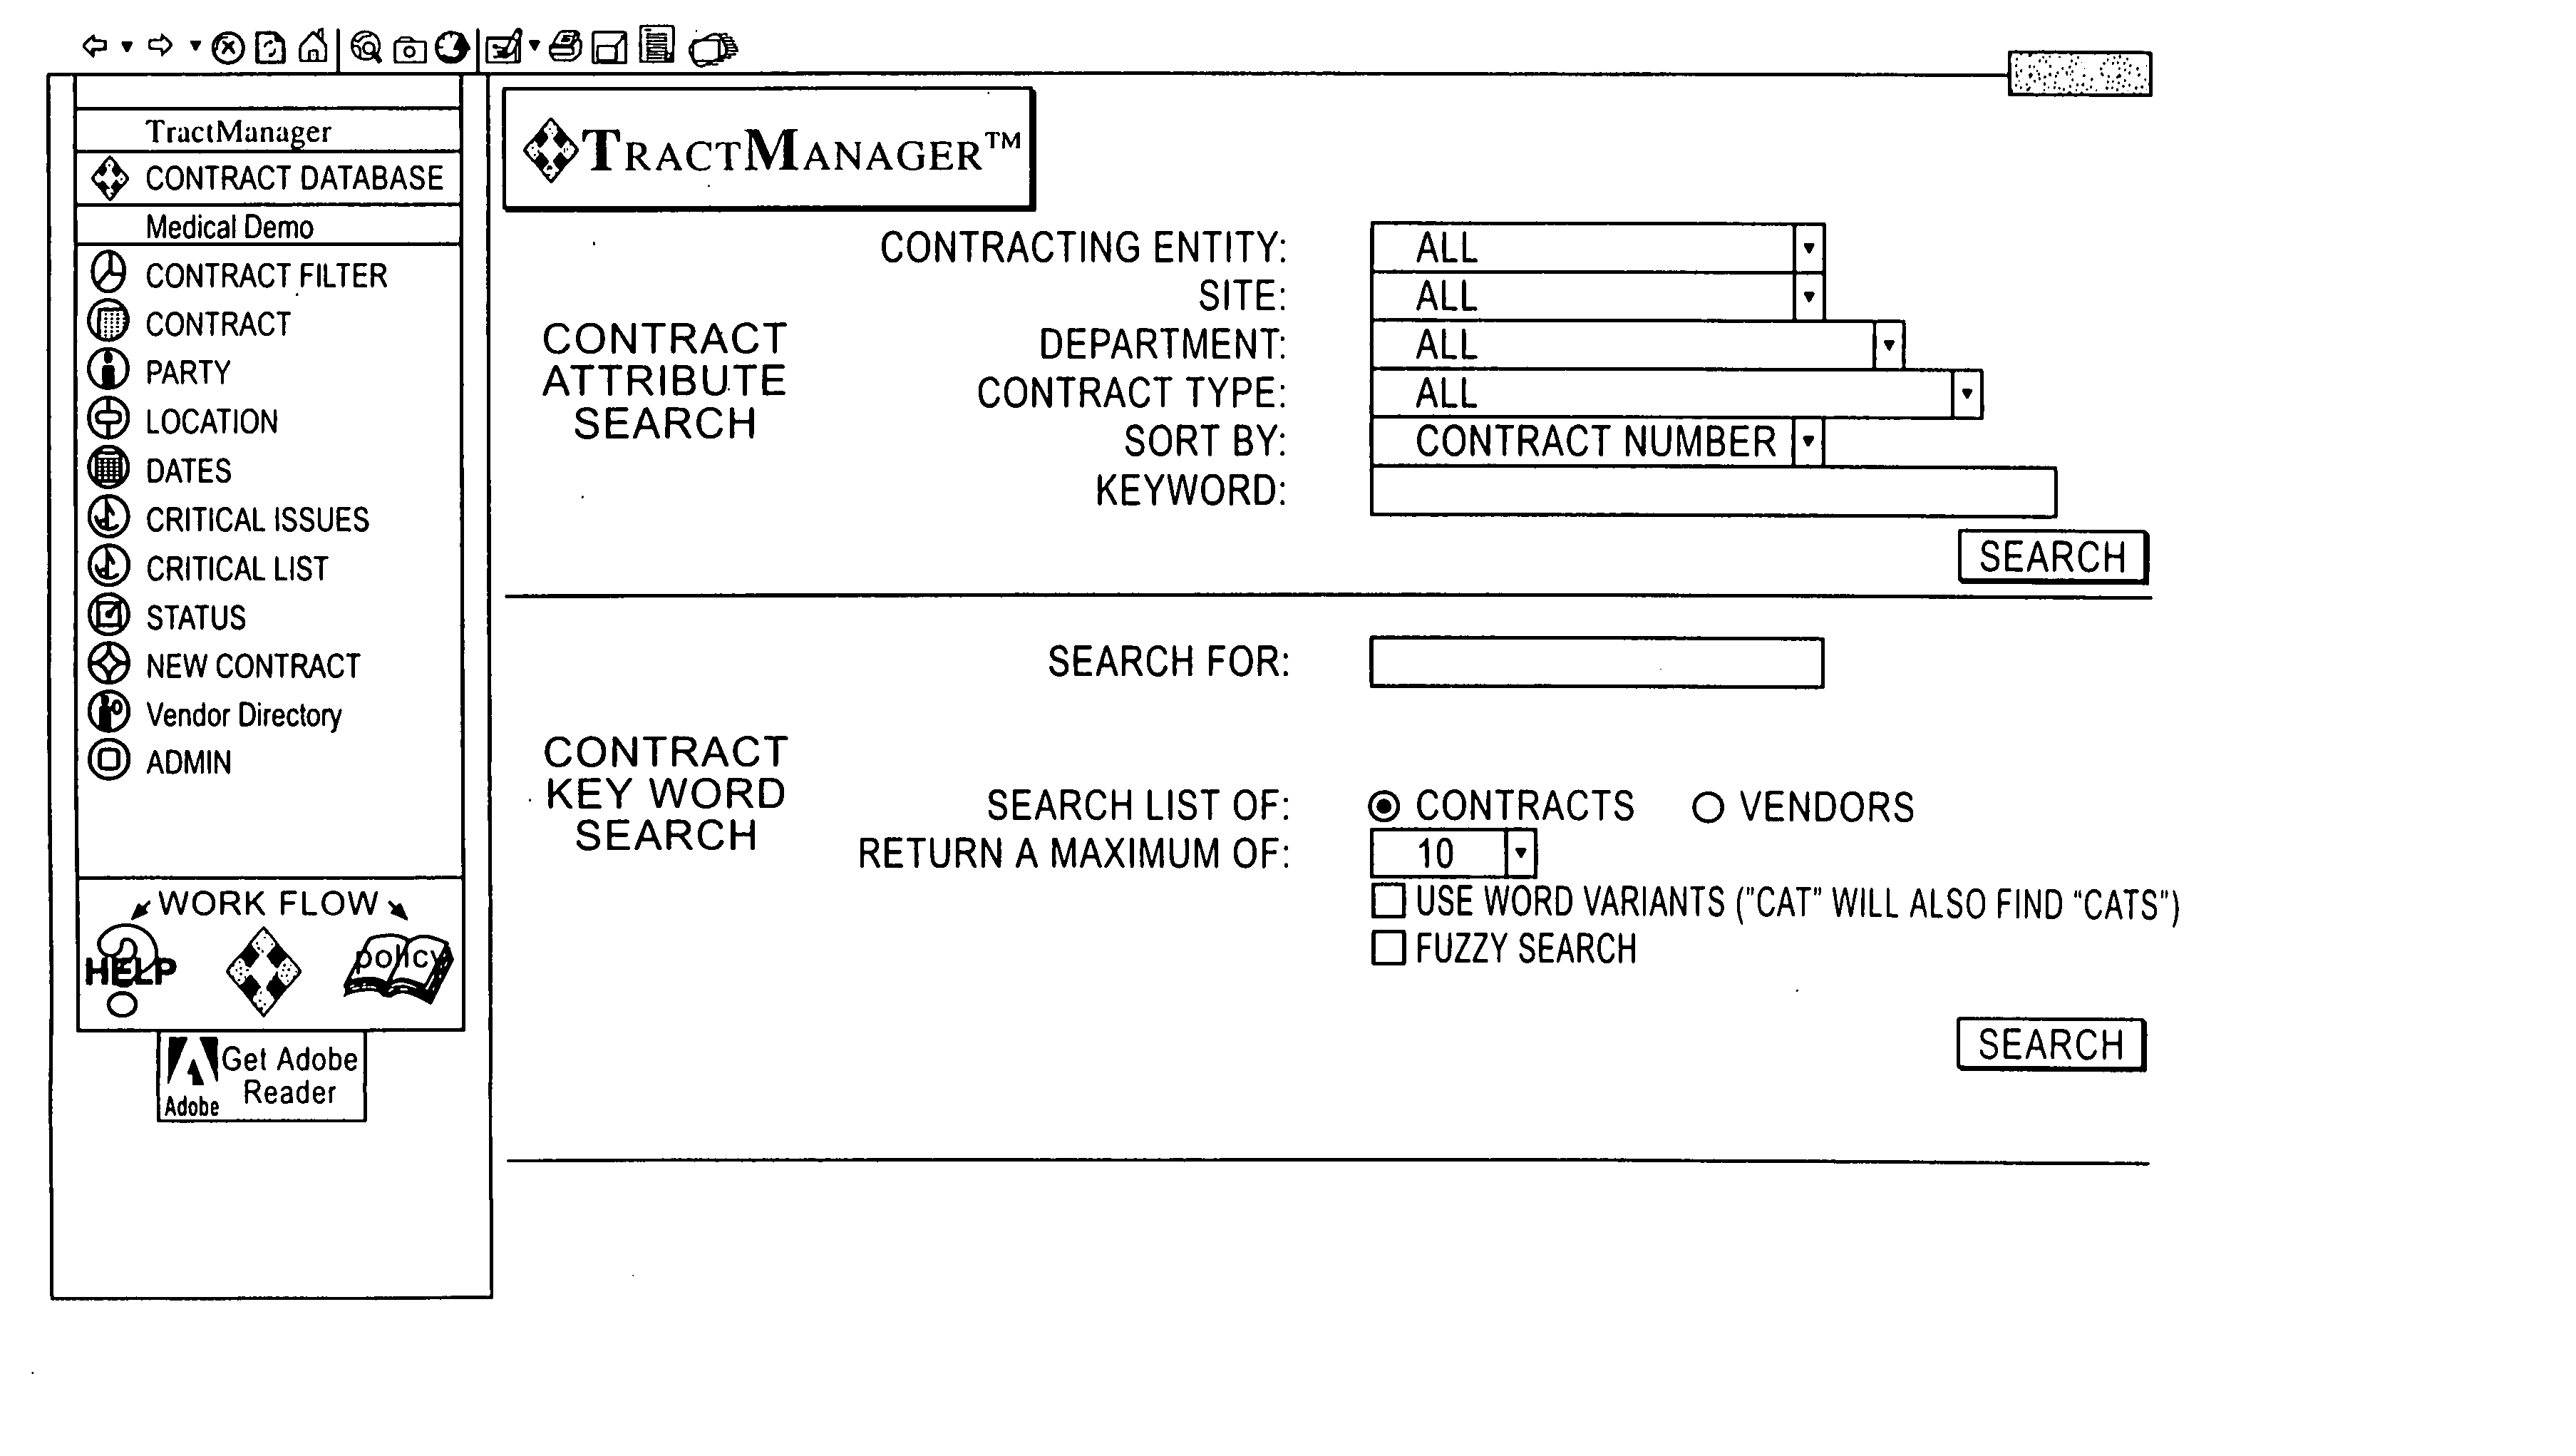 Method and system to convert paper documents to electronic documents and manage the electronic documents